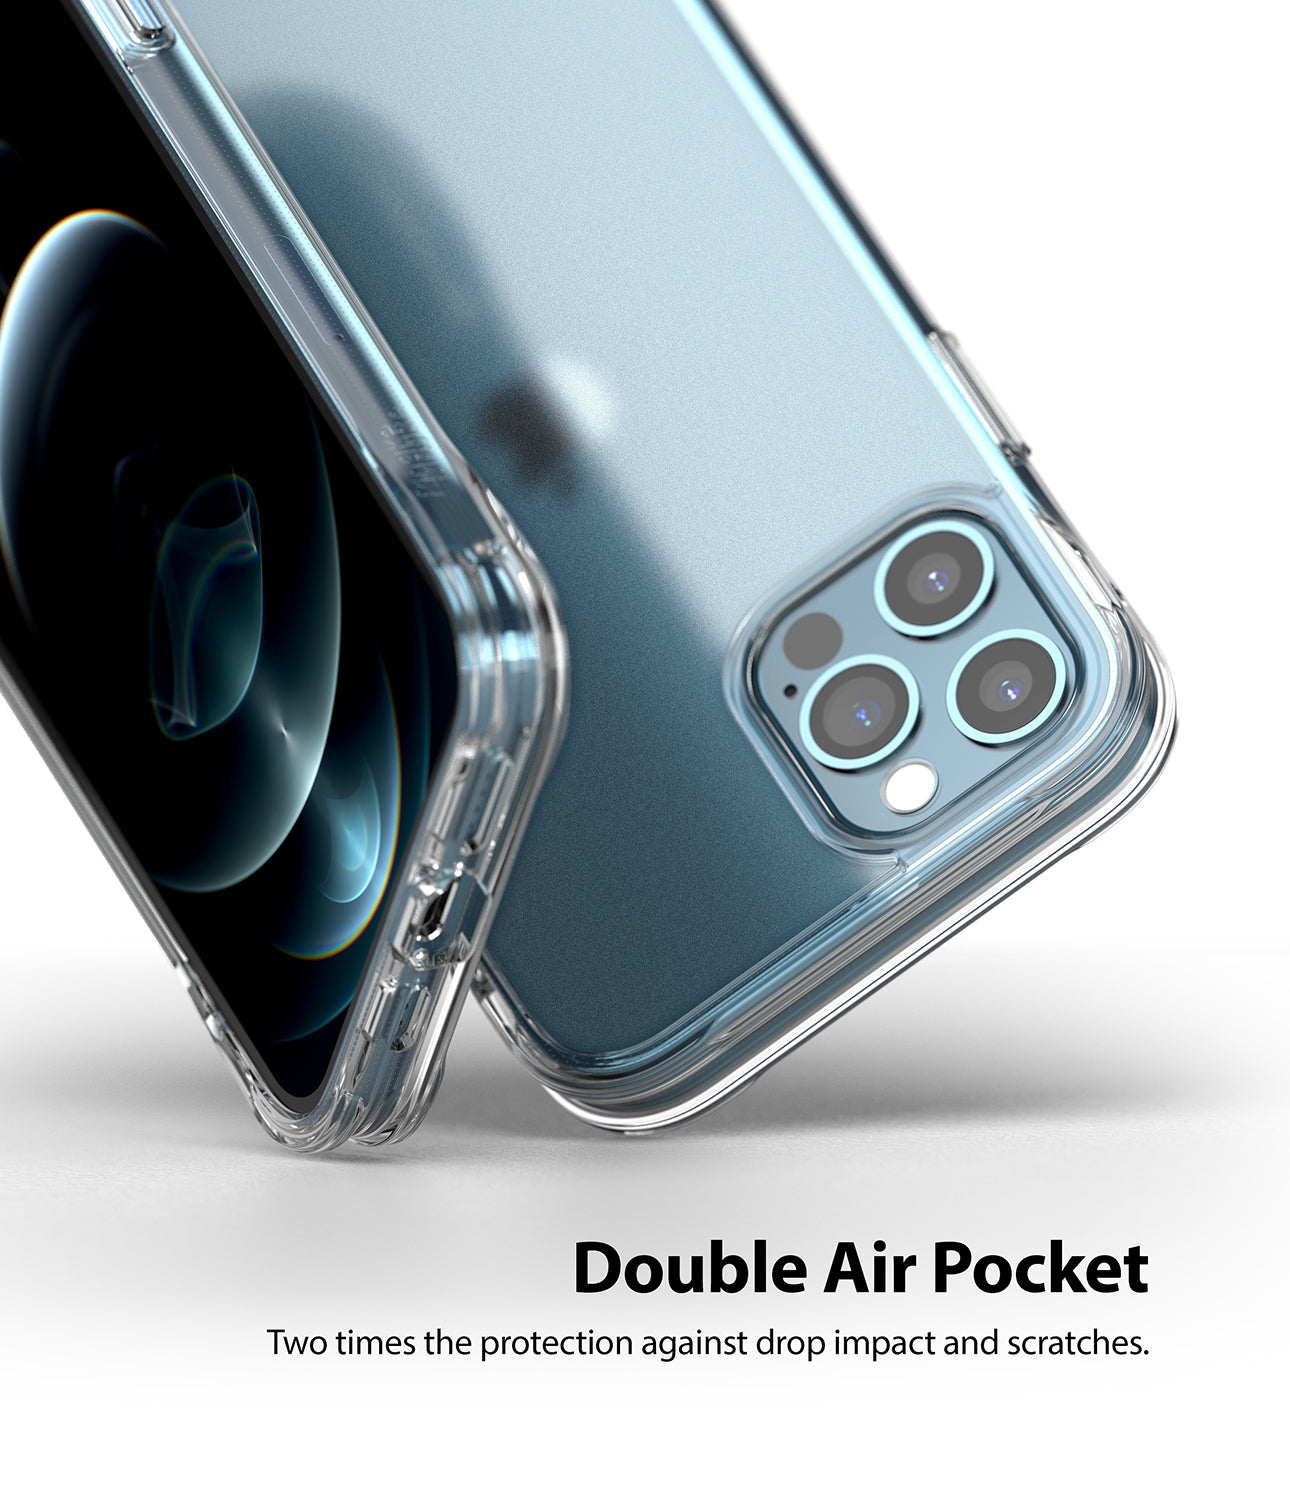 double air pocket - two times the protection against drop impact and scratches